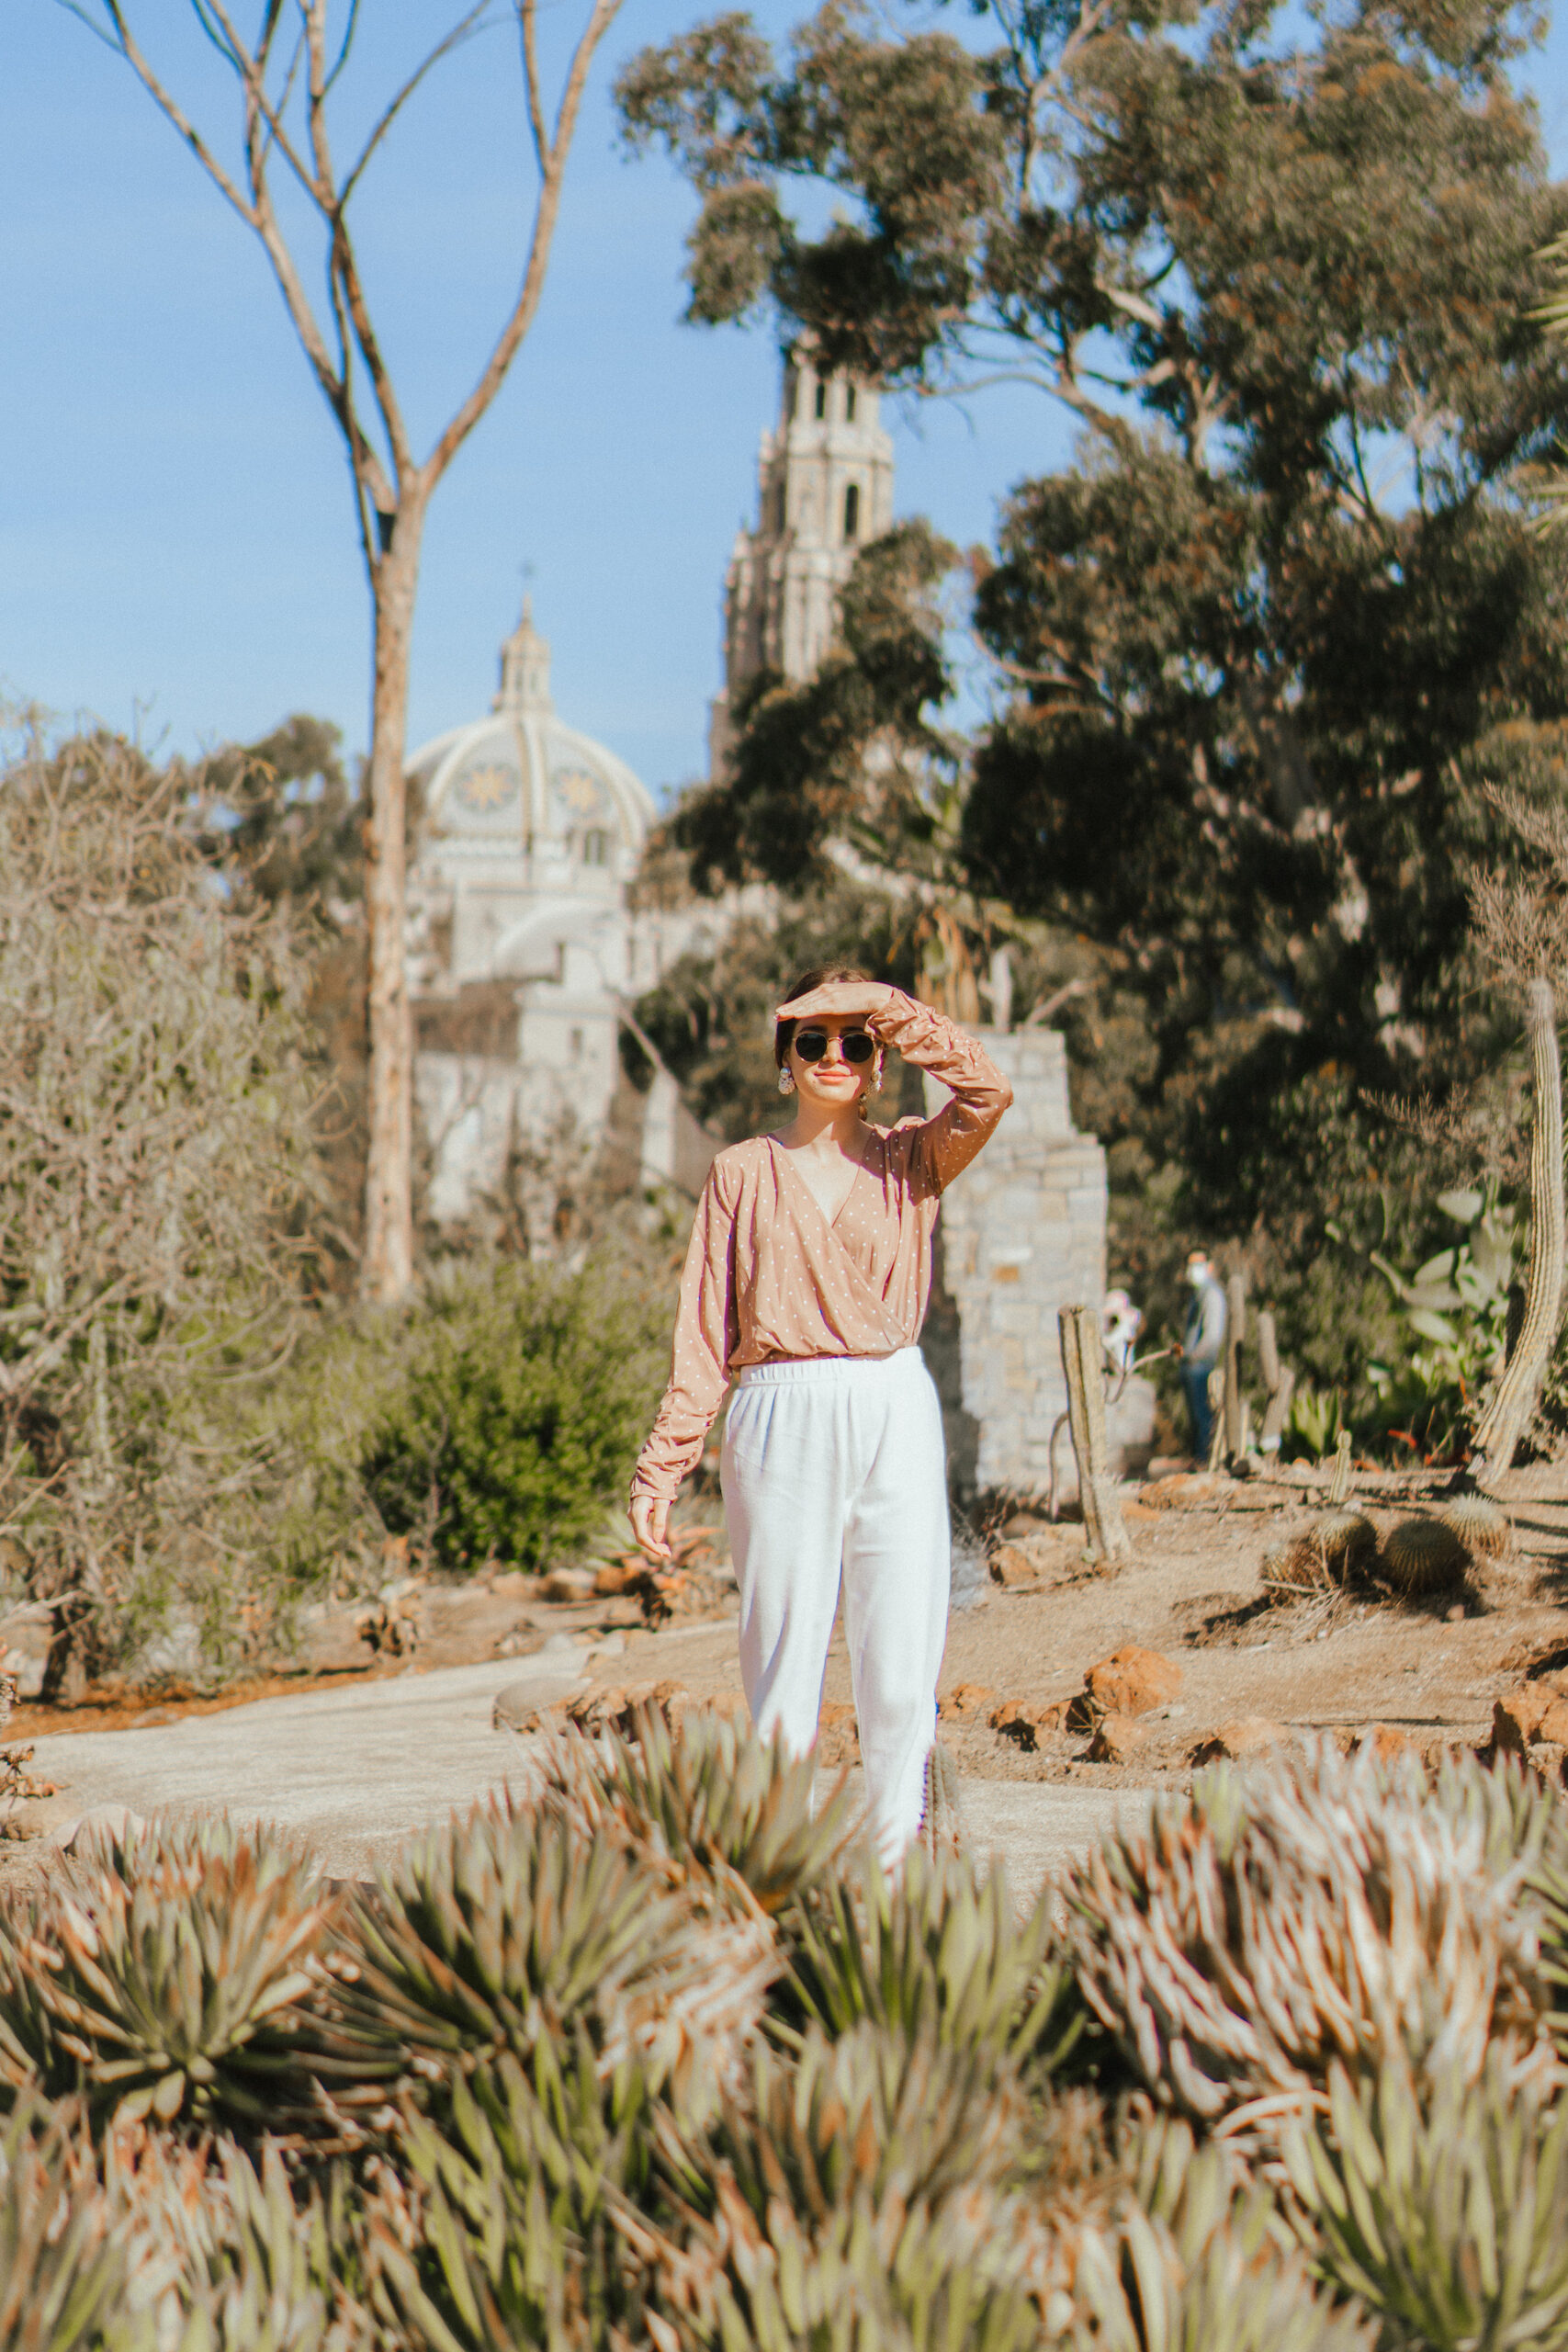 Things to do in Balboa Park: How to spend one day at San Diego’s top attraction